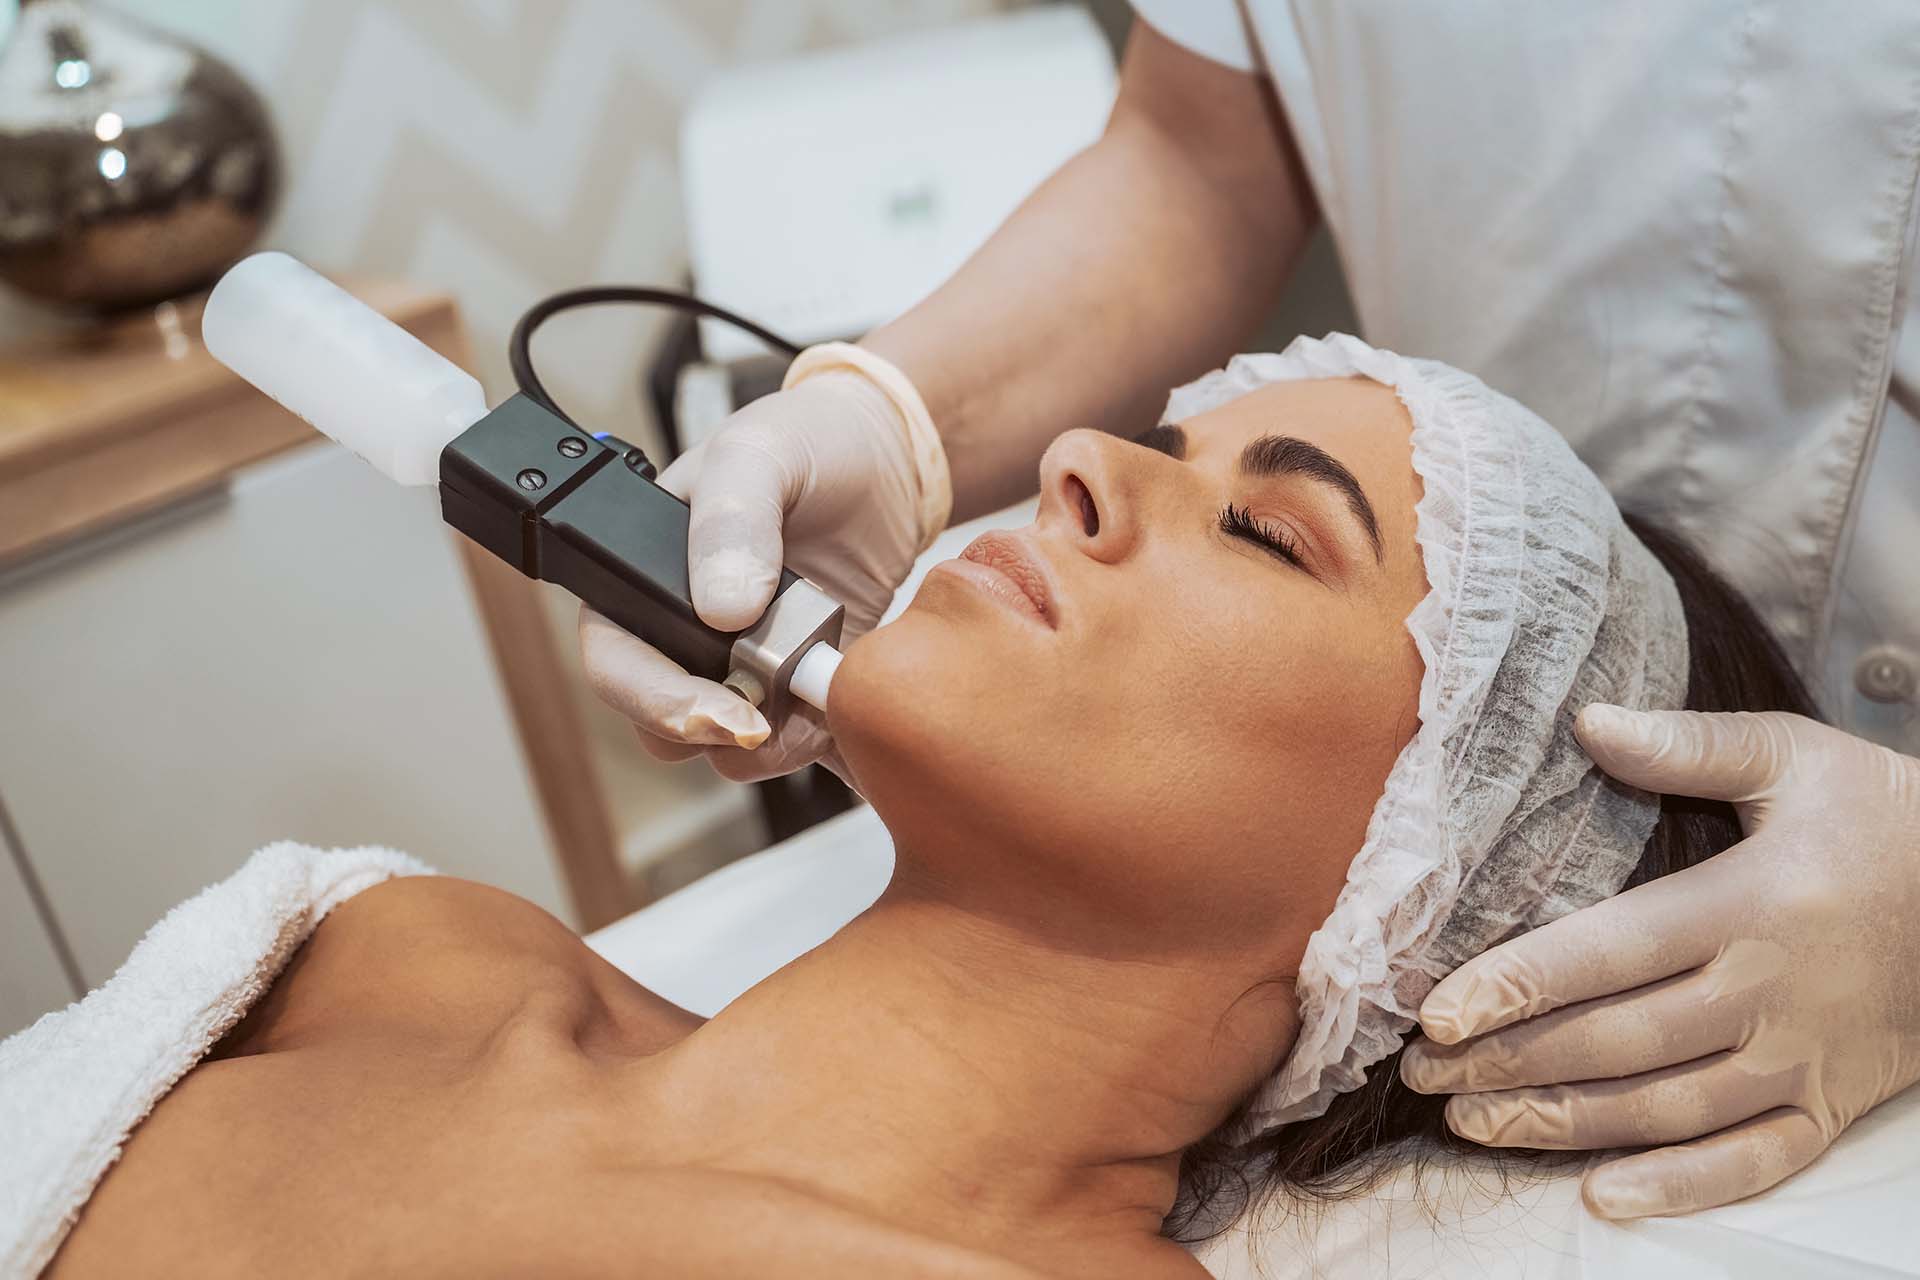 5 Expected Results Of Microdermabrasion